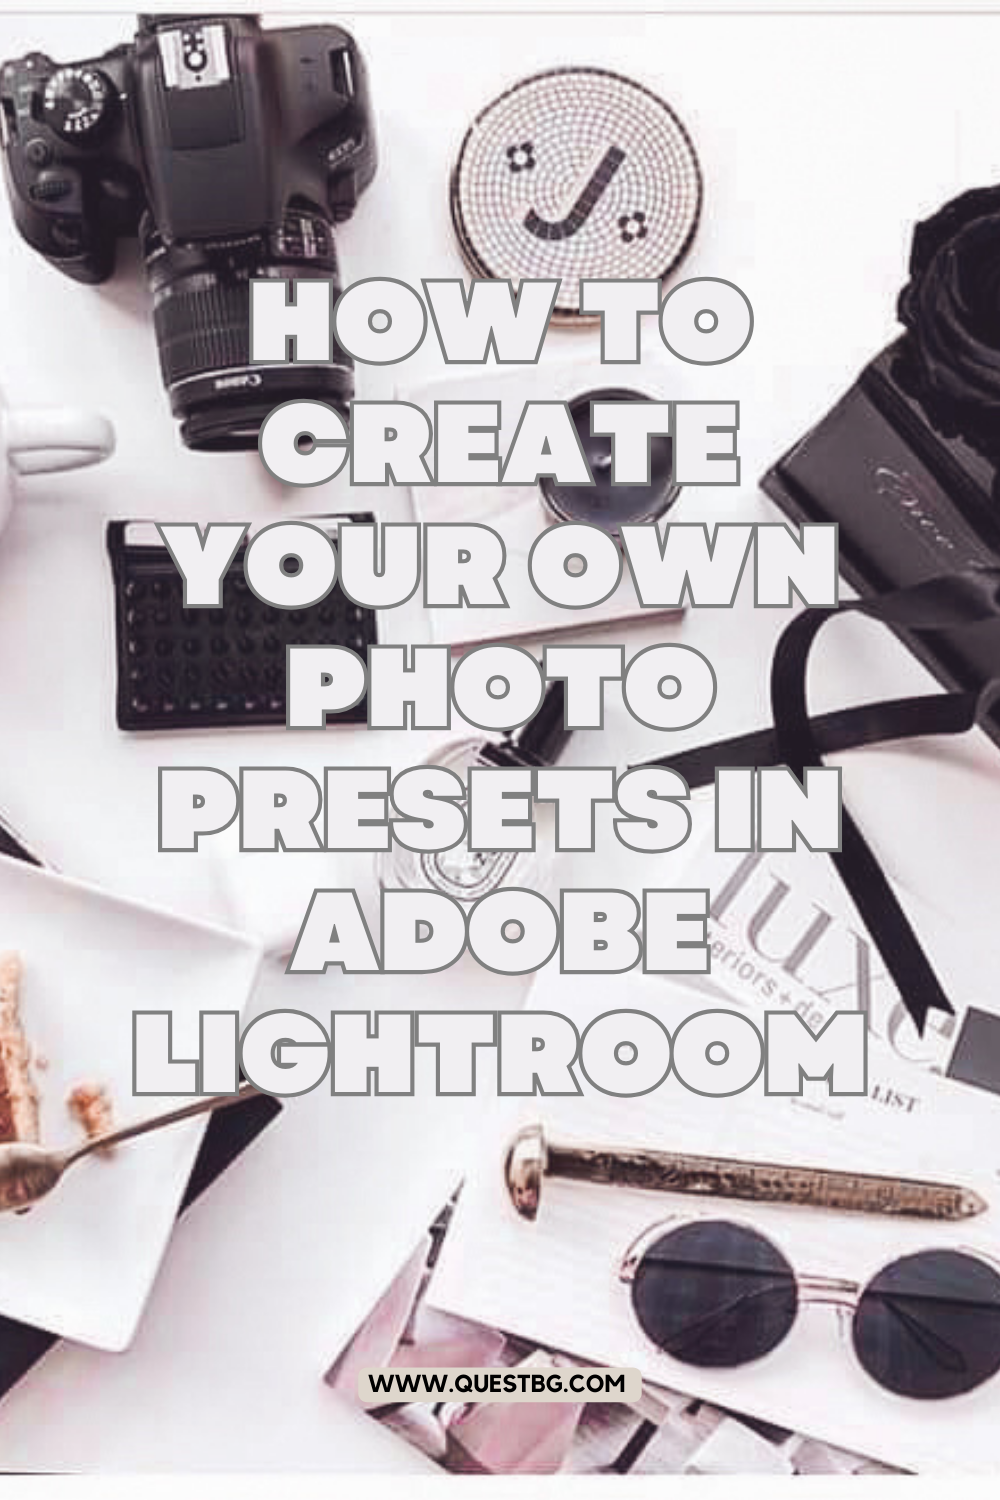 How to Create Your Own Photo Presets in Adobe Lightroom